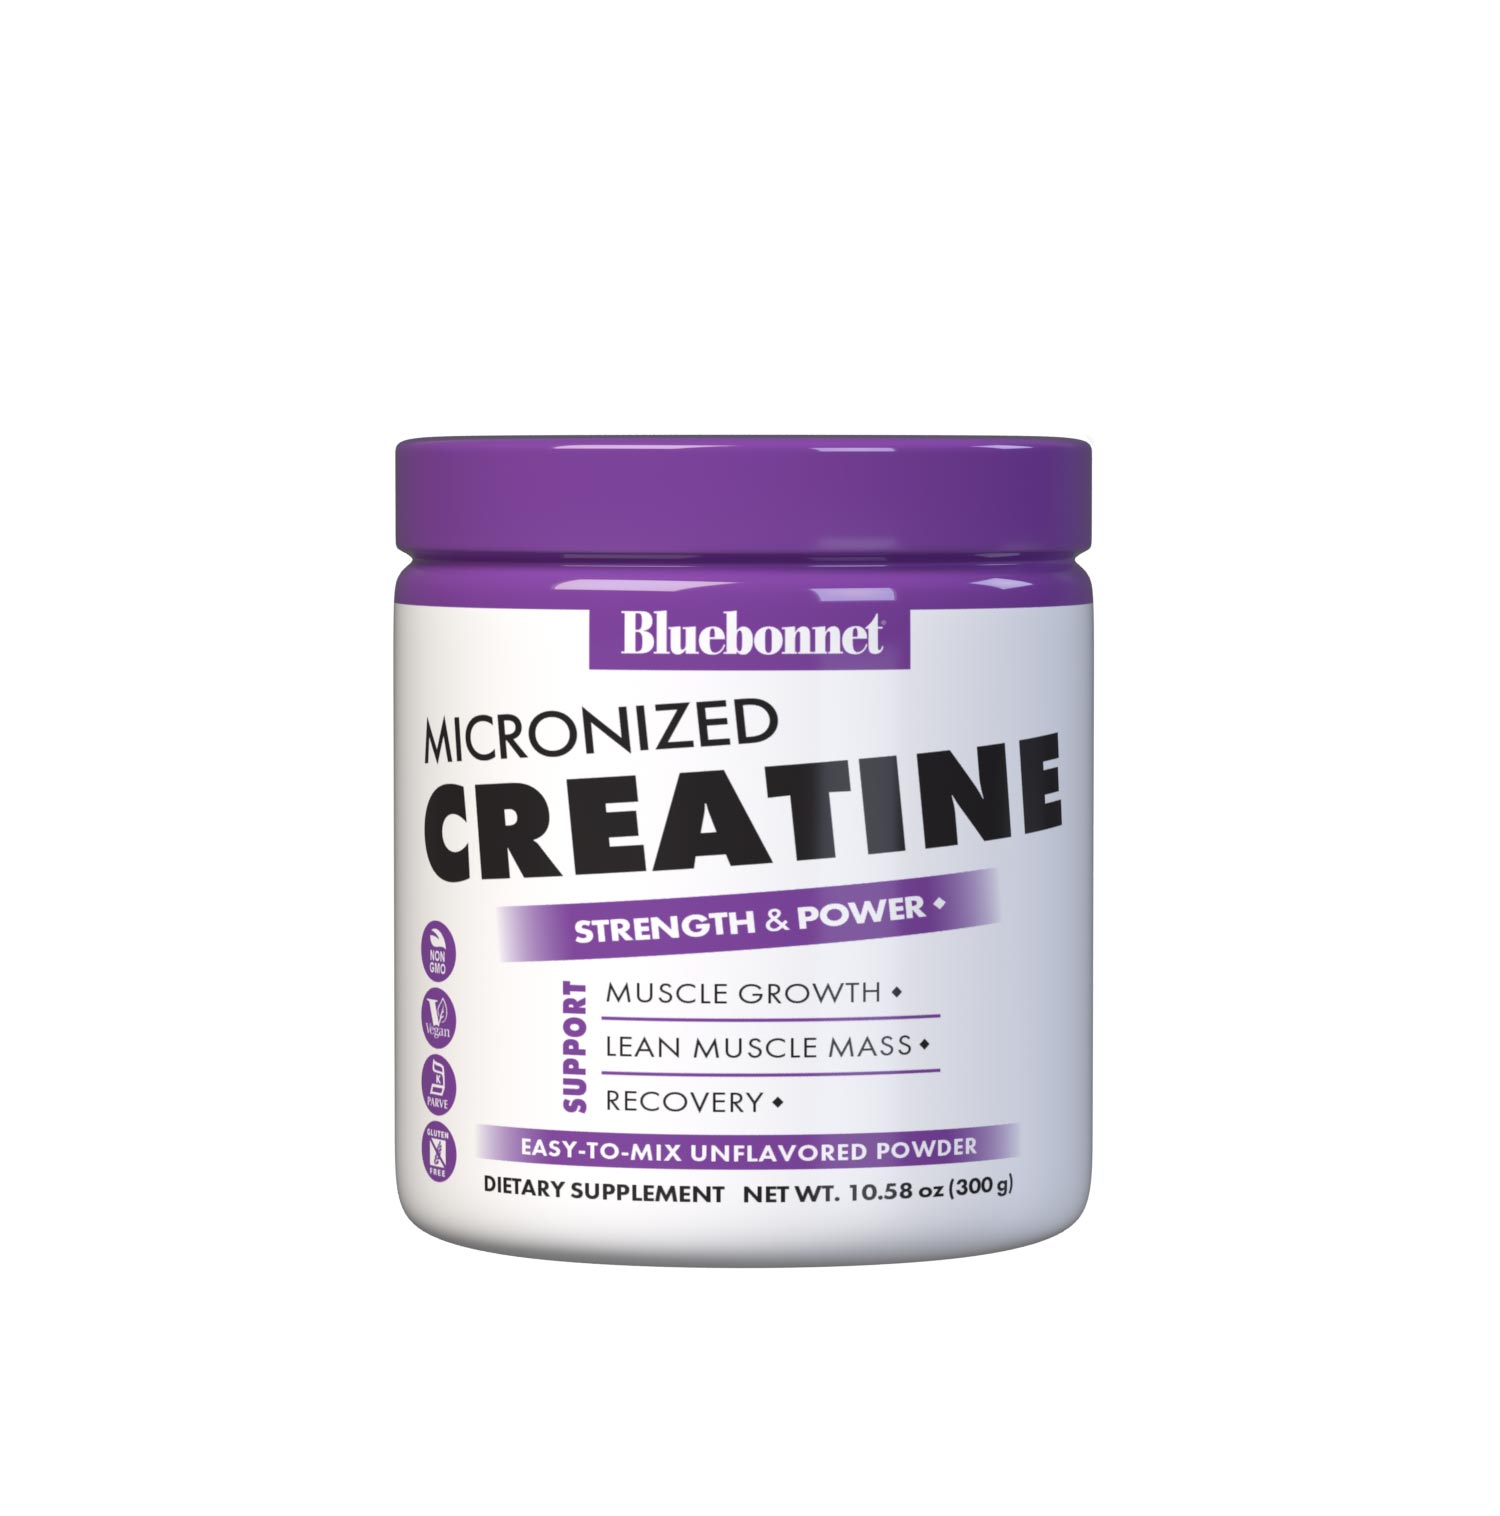 Bluebonnet's micronized creatine powder for muscle growth, lean muscle mass and fast recovery. Easy-to-mix unflavored powder. #size_10.58 oz